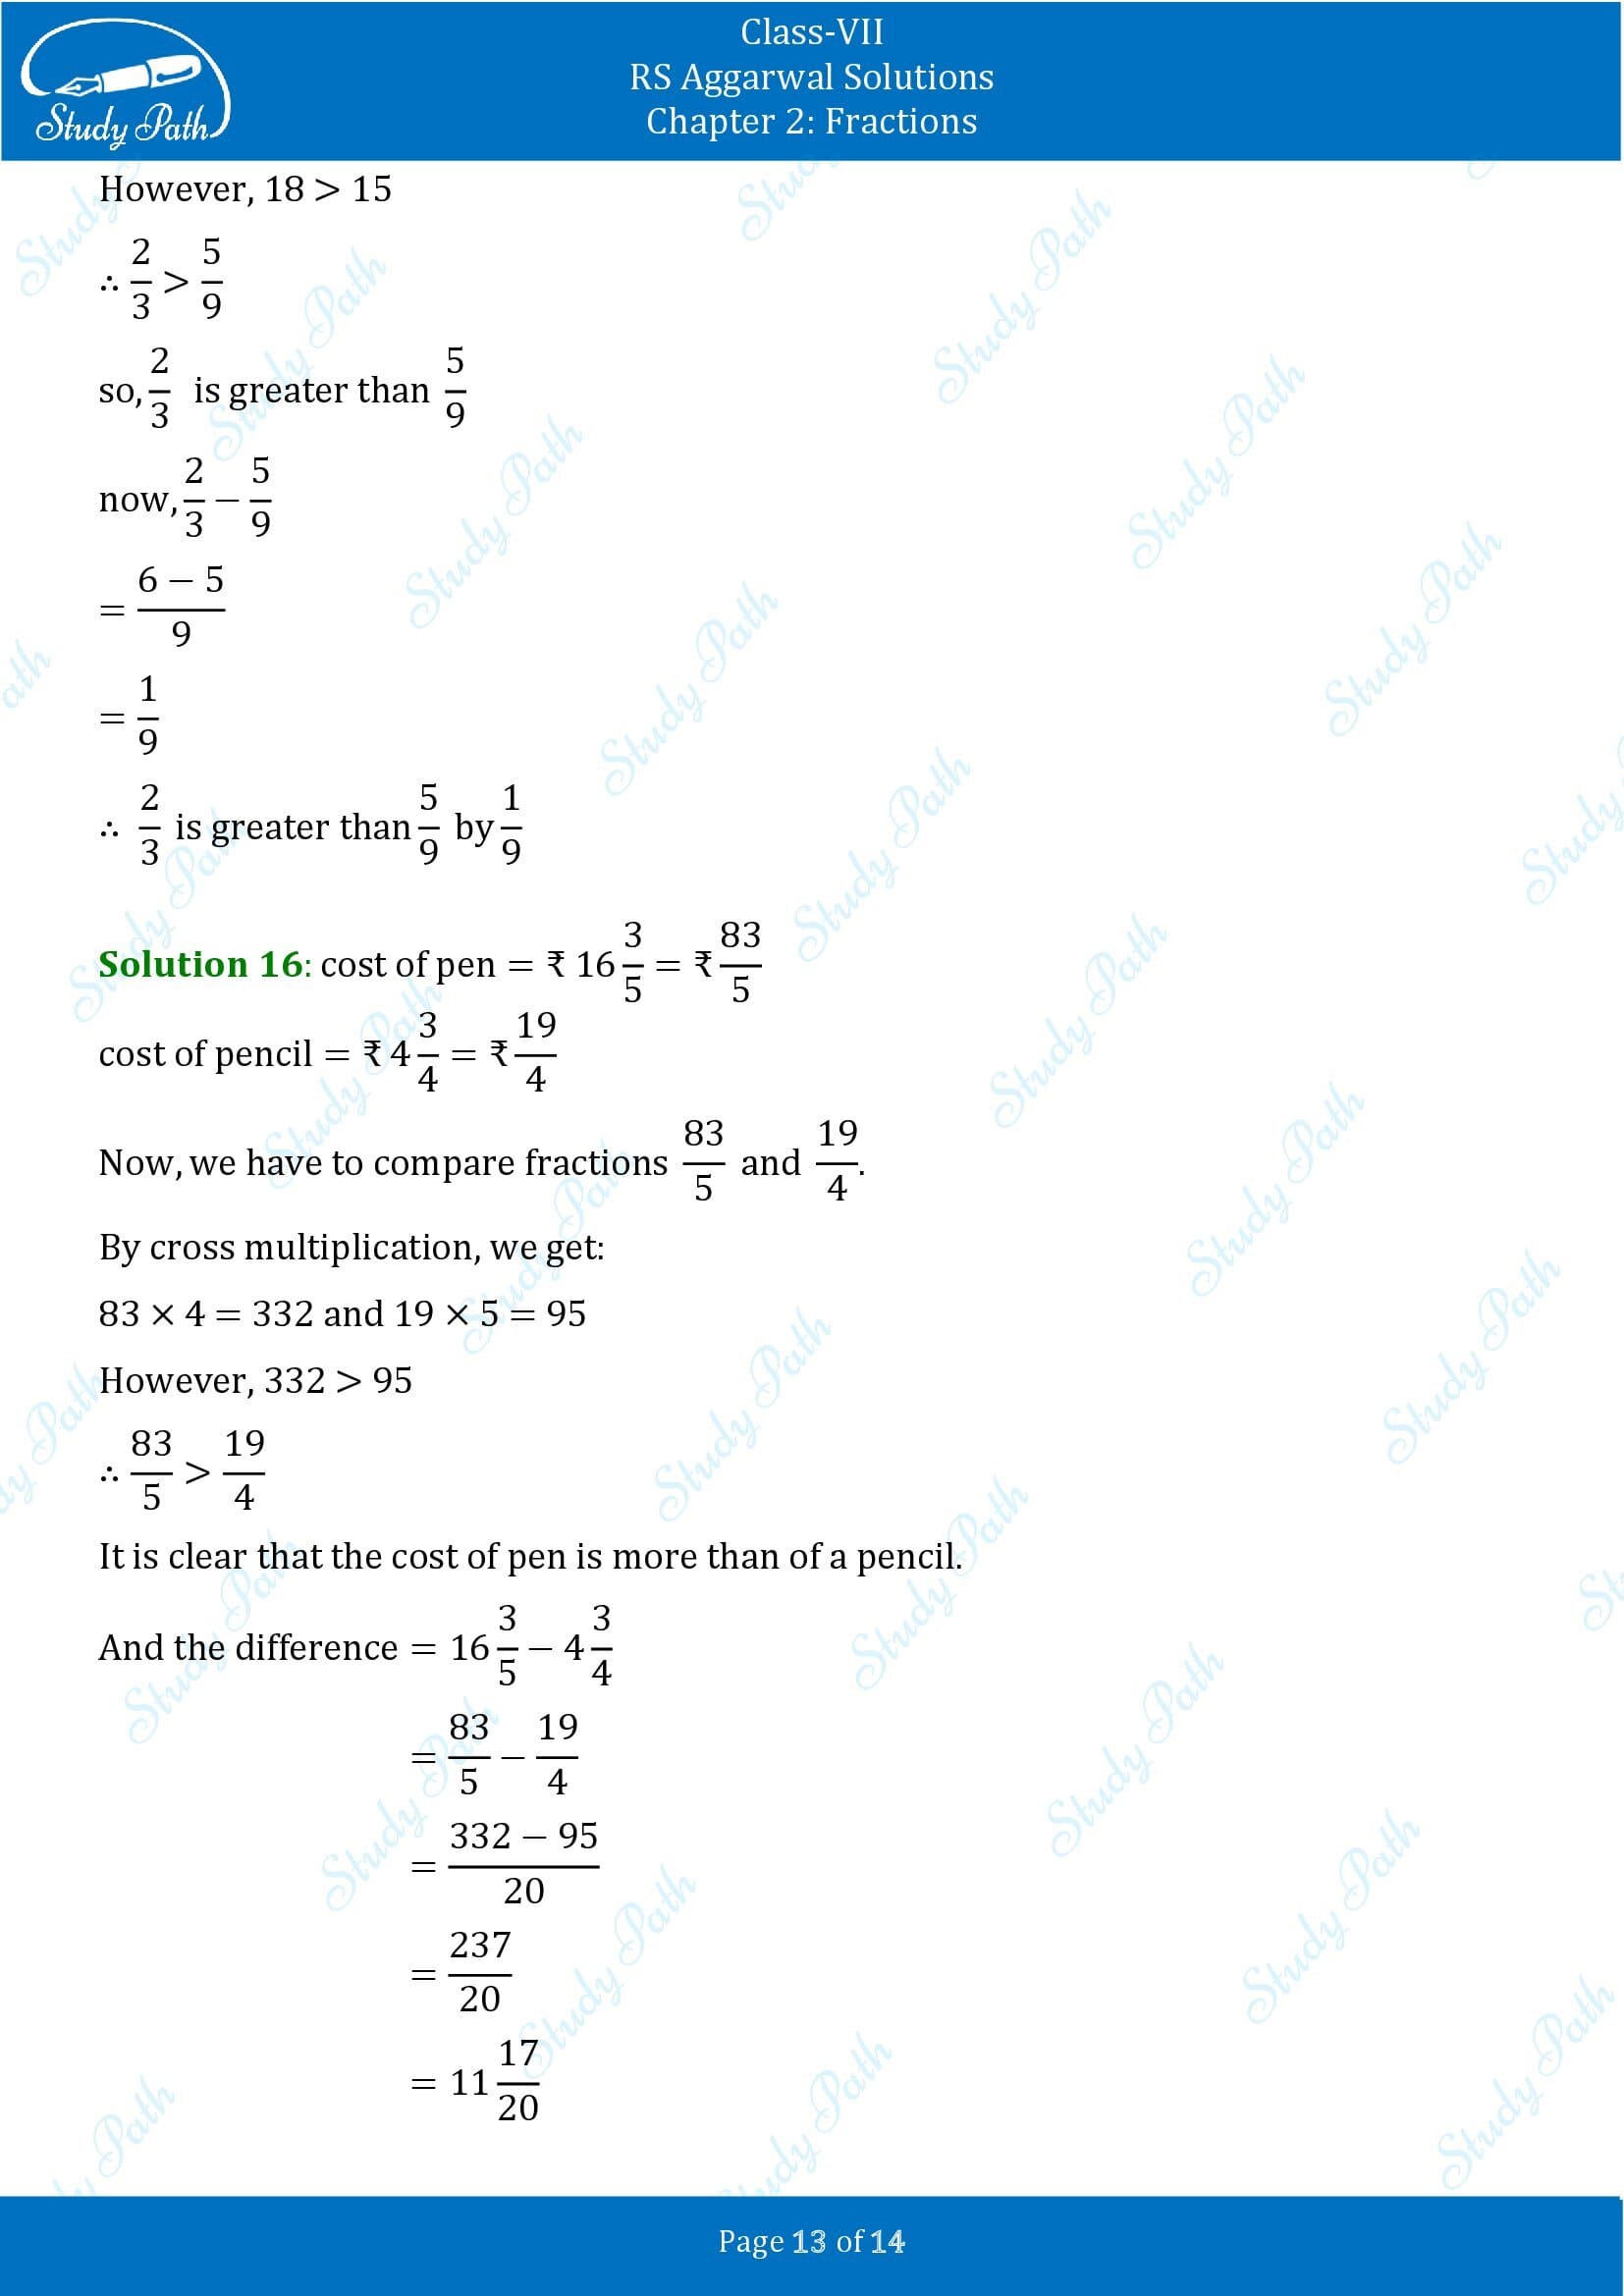 RS Aggarwal Solutions Class 7 Chapter 2 Fractions Exercise 2A 00013